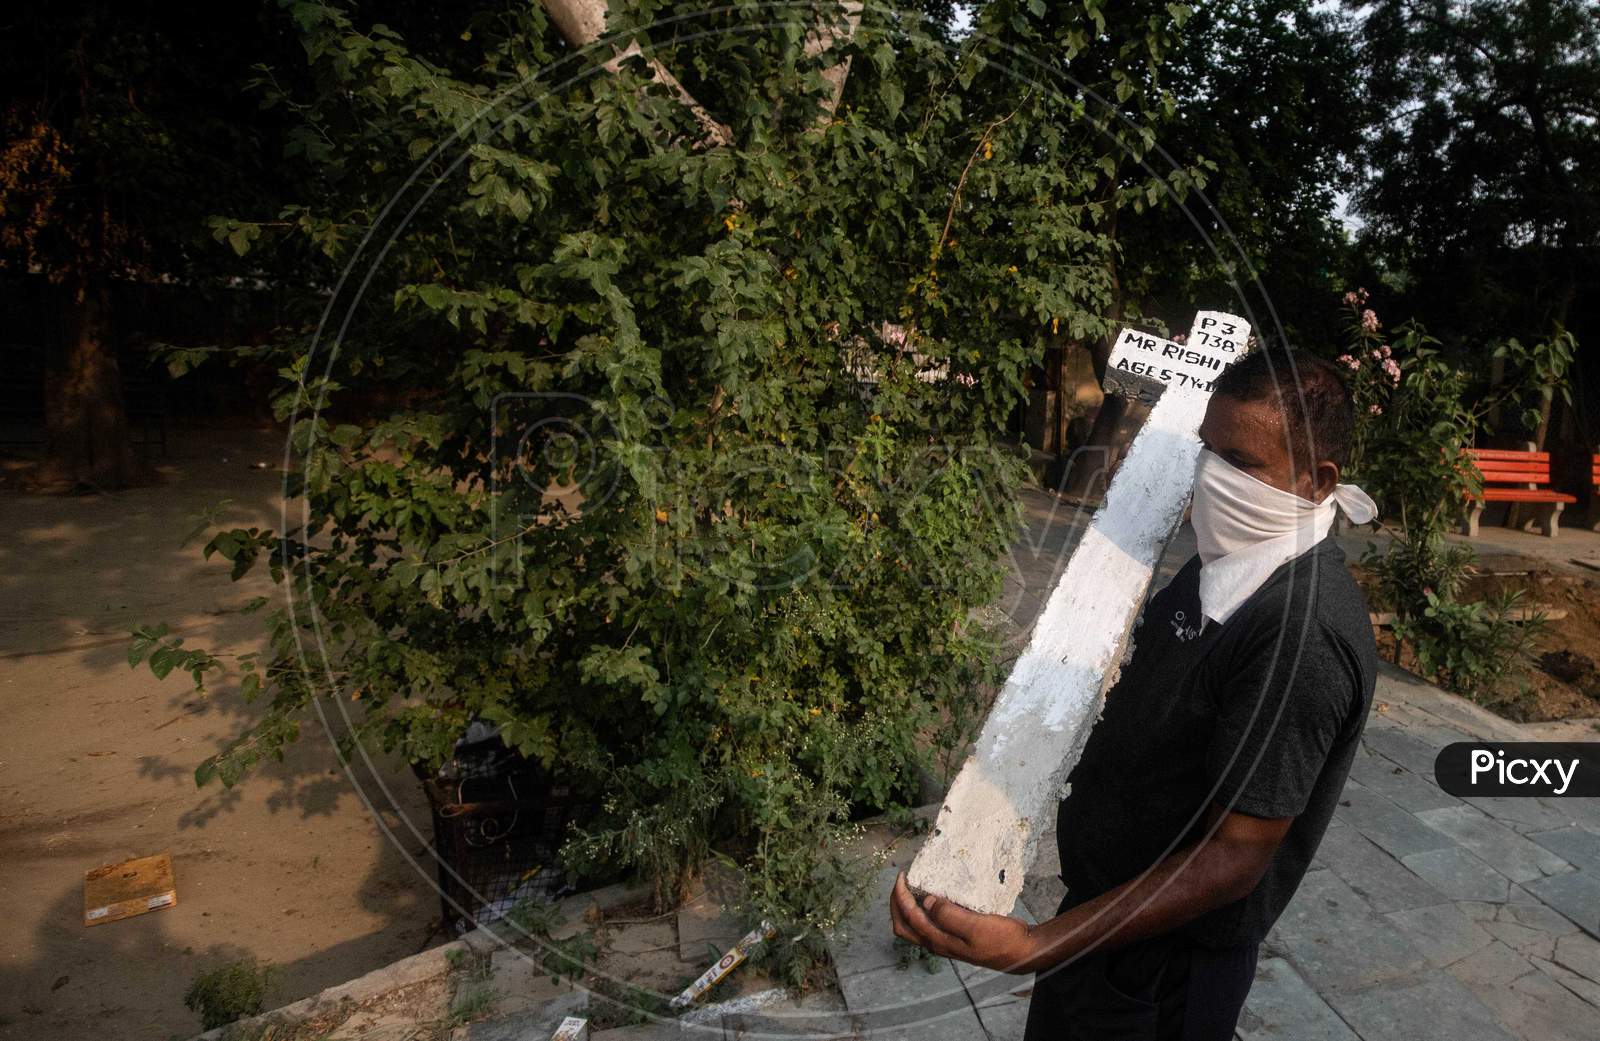 A Cemetery Worker Carries A Cross  At Mangolpuri Cemetery Amid The Covid-19 Pandemic On July 1, 2020 In New Delhi, India.